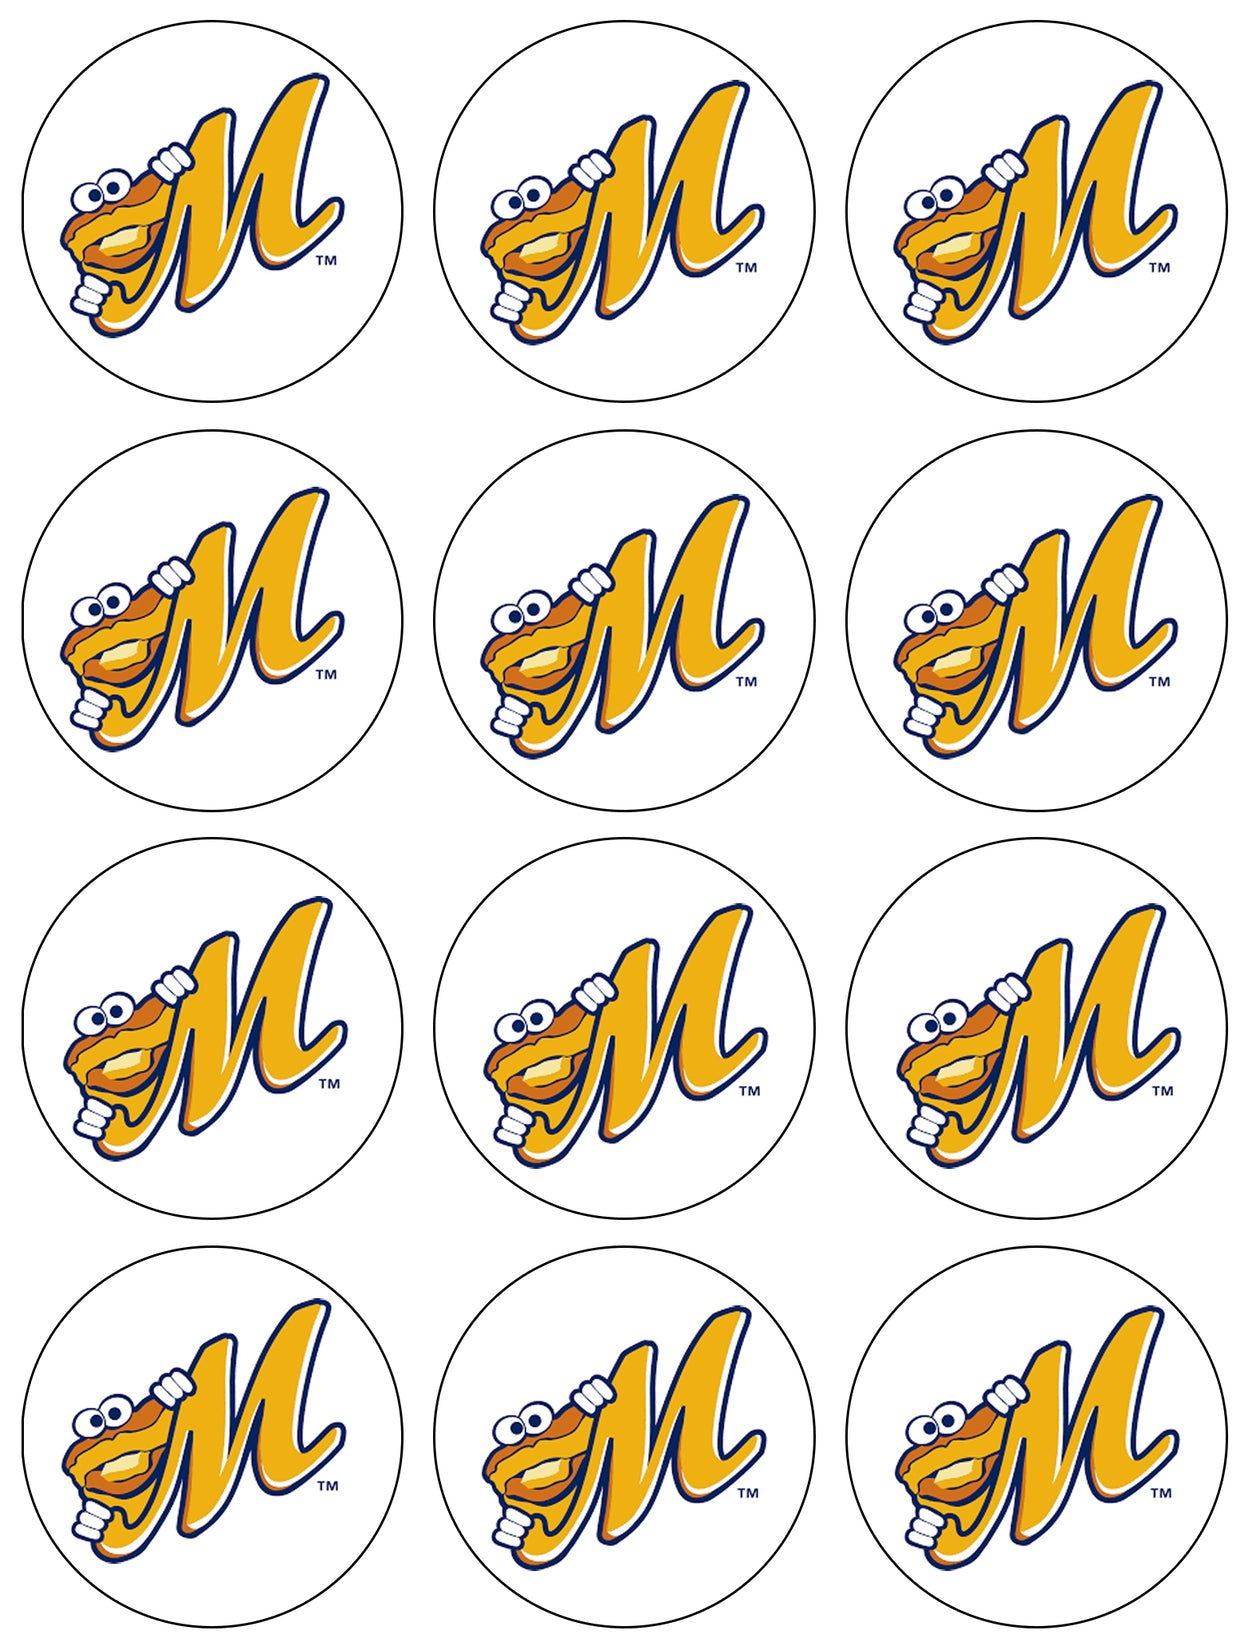 Montgomery Biscuits Minor League Baseball Logo Edible Cupcake Topper Images ABPID55973